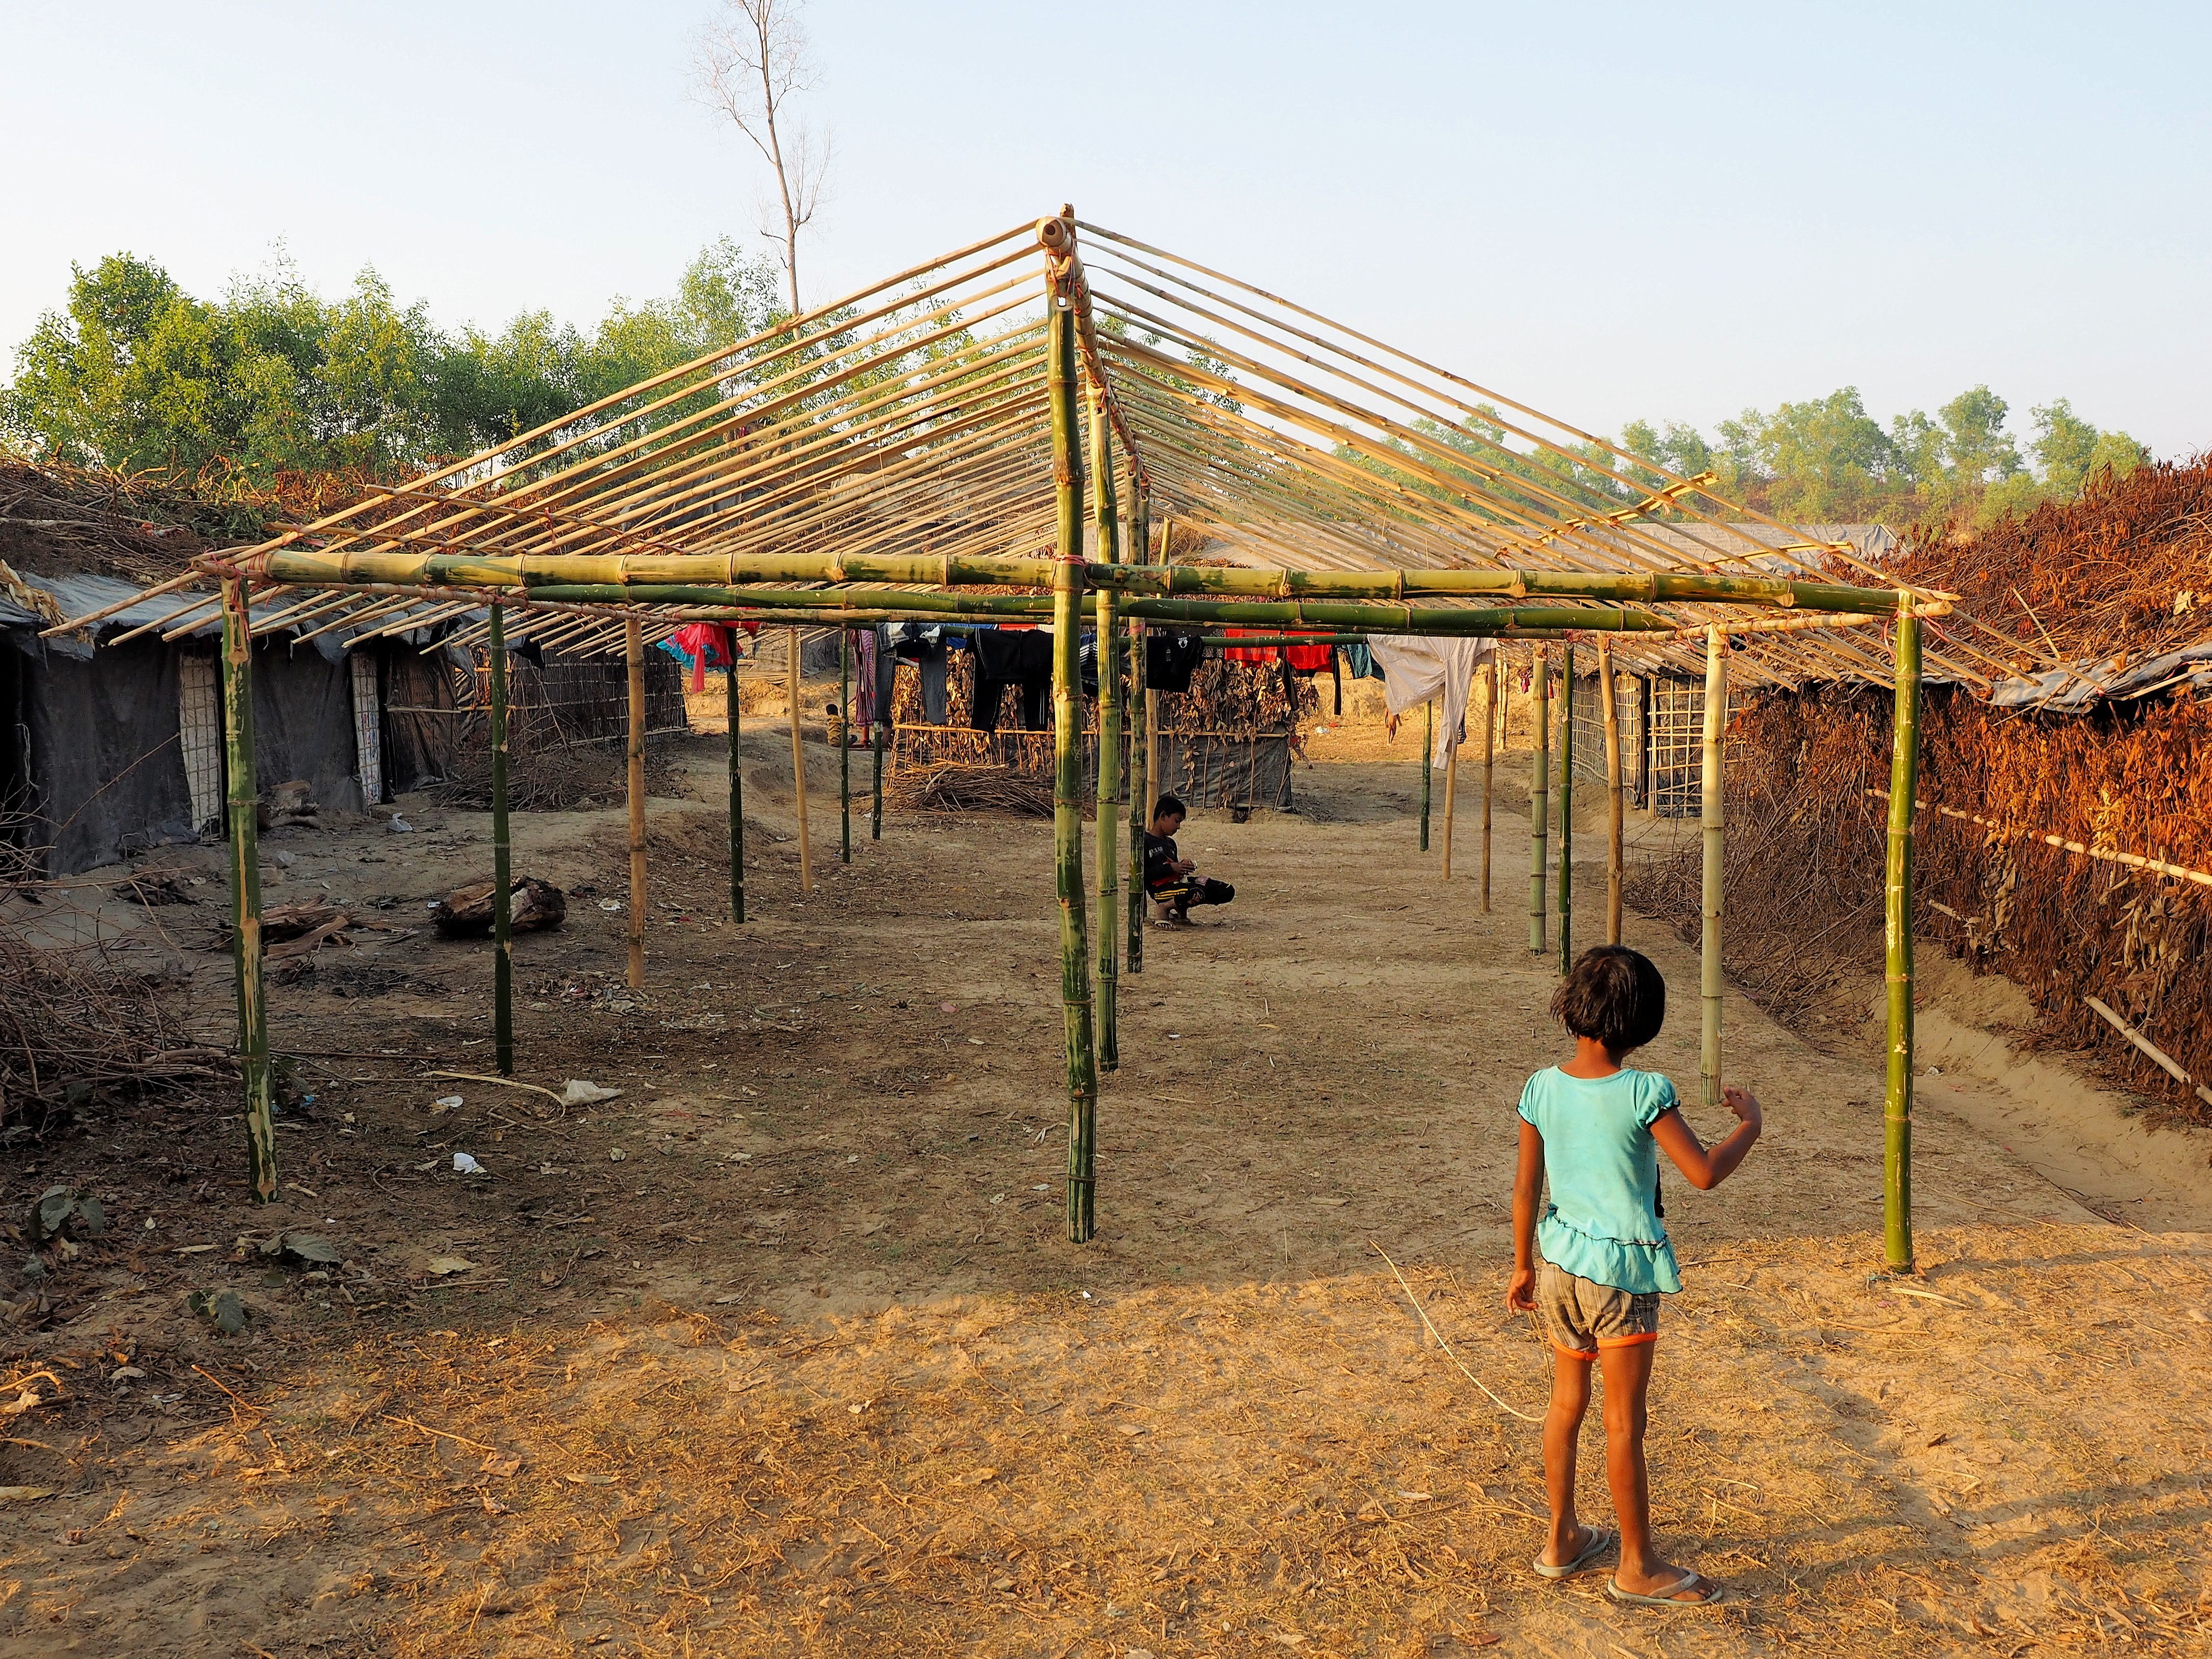 Half-built house in squatters refugee camp. Image by Doug Bock Clark. Bangladesh, 2017.